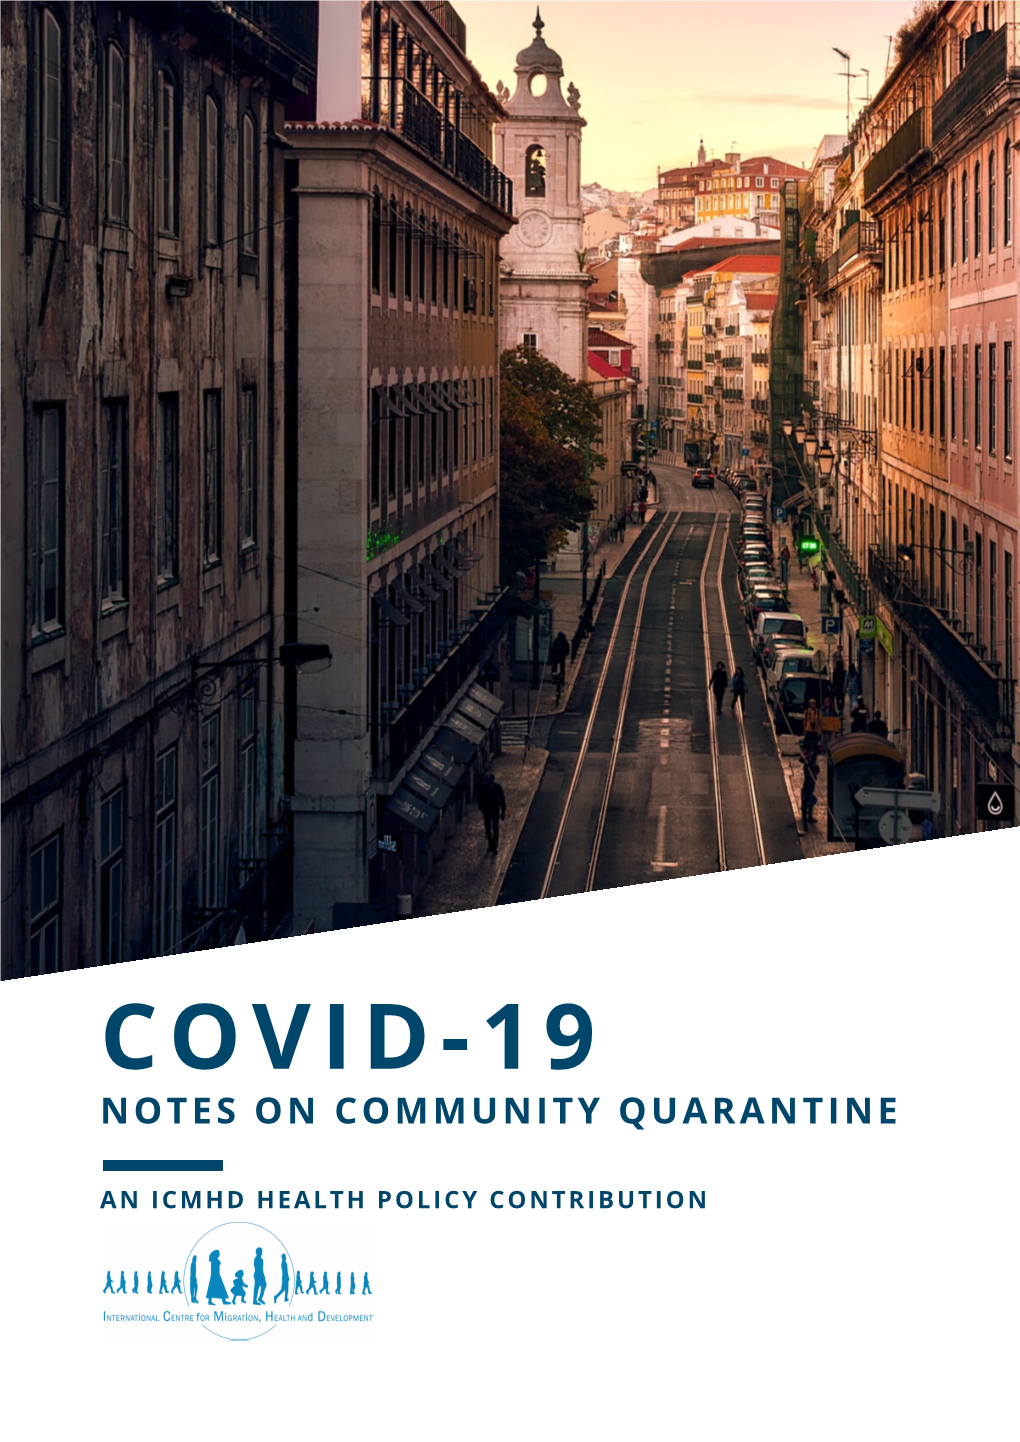 Notes on COVID-19 and Community Quarantine